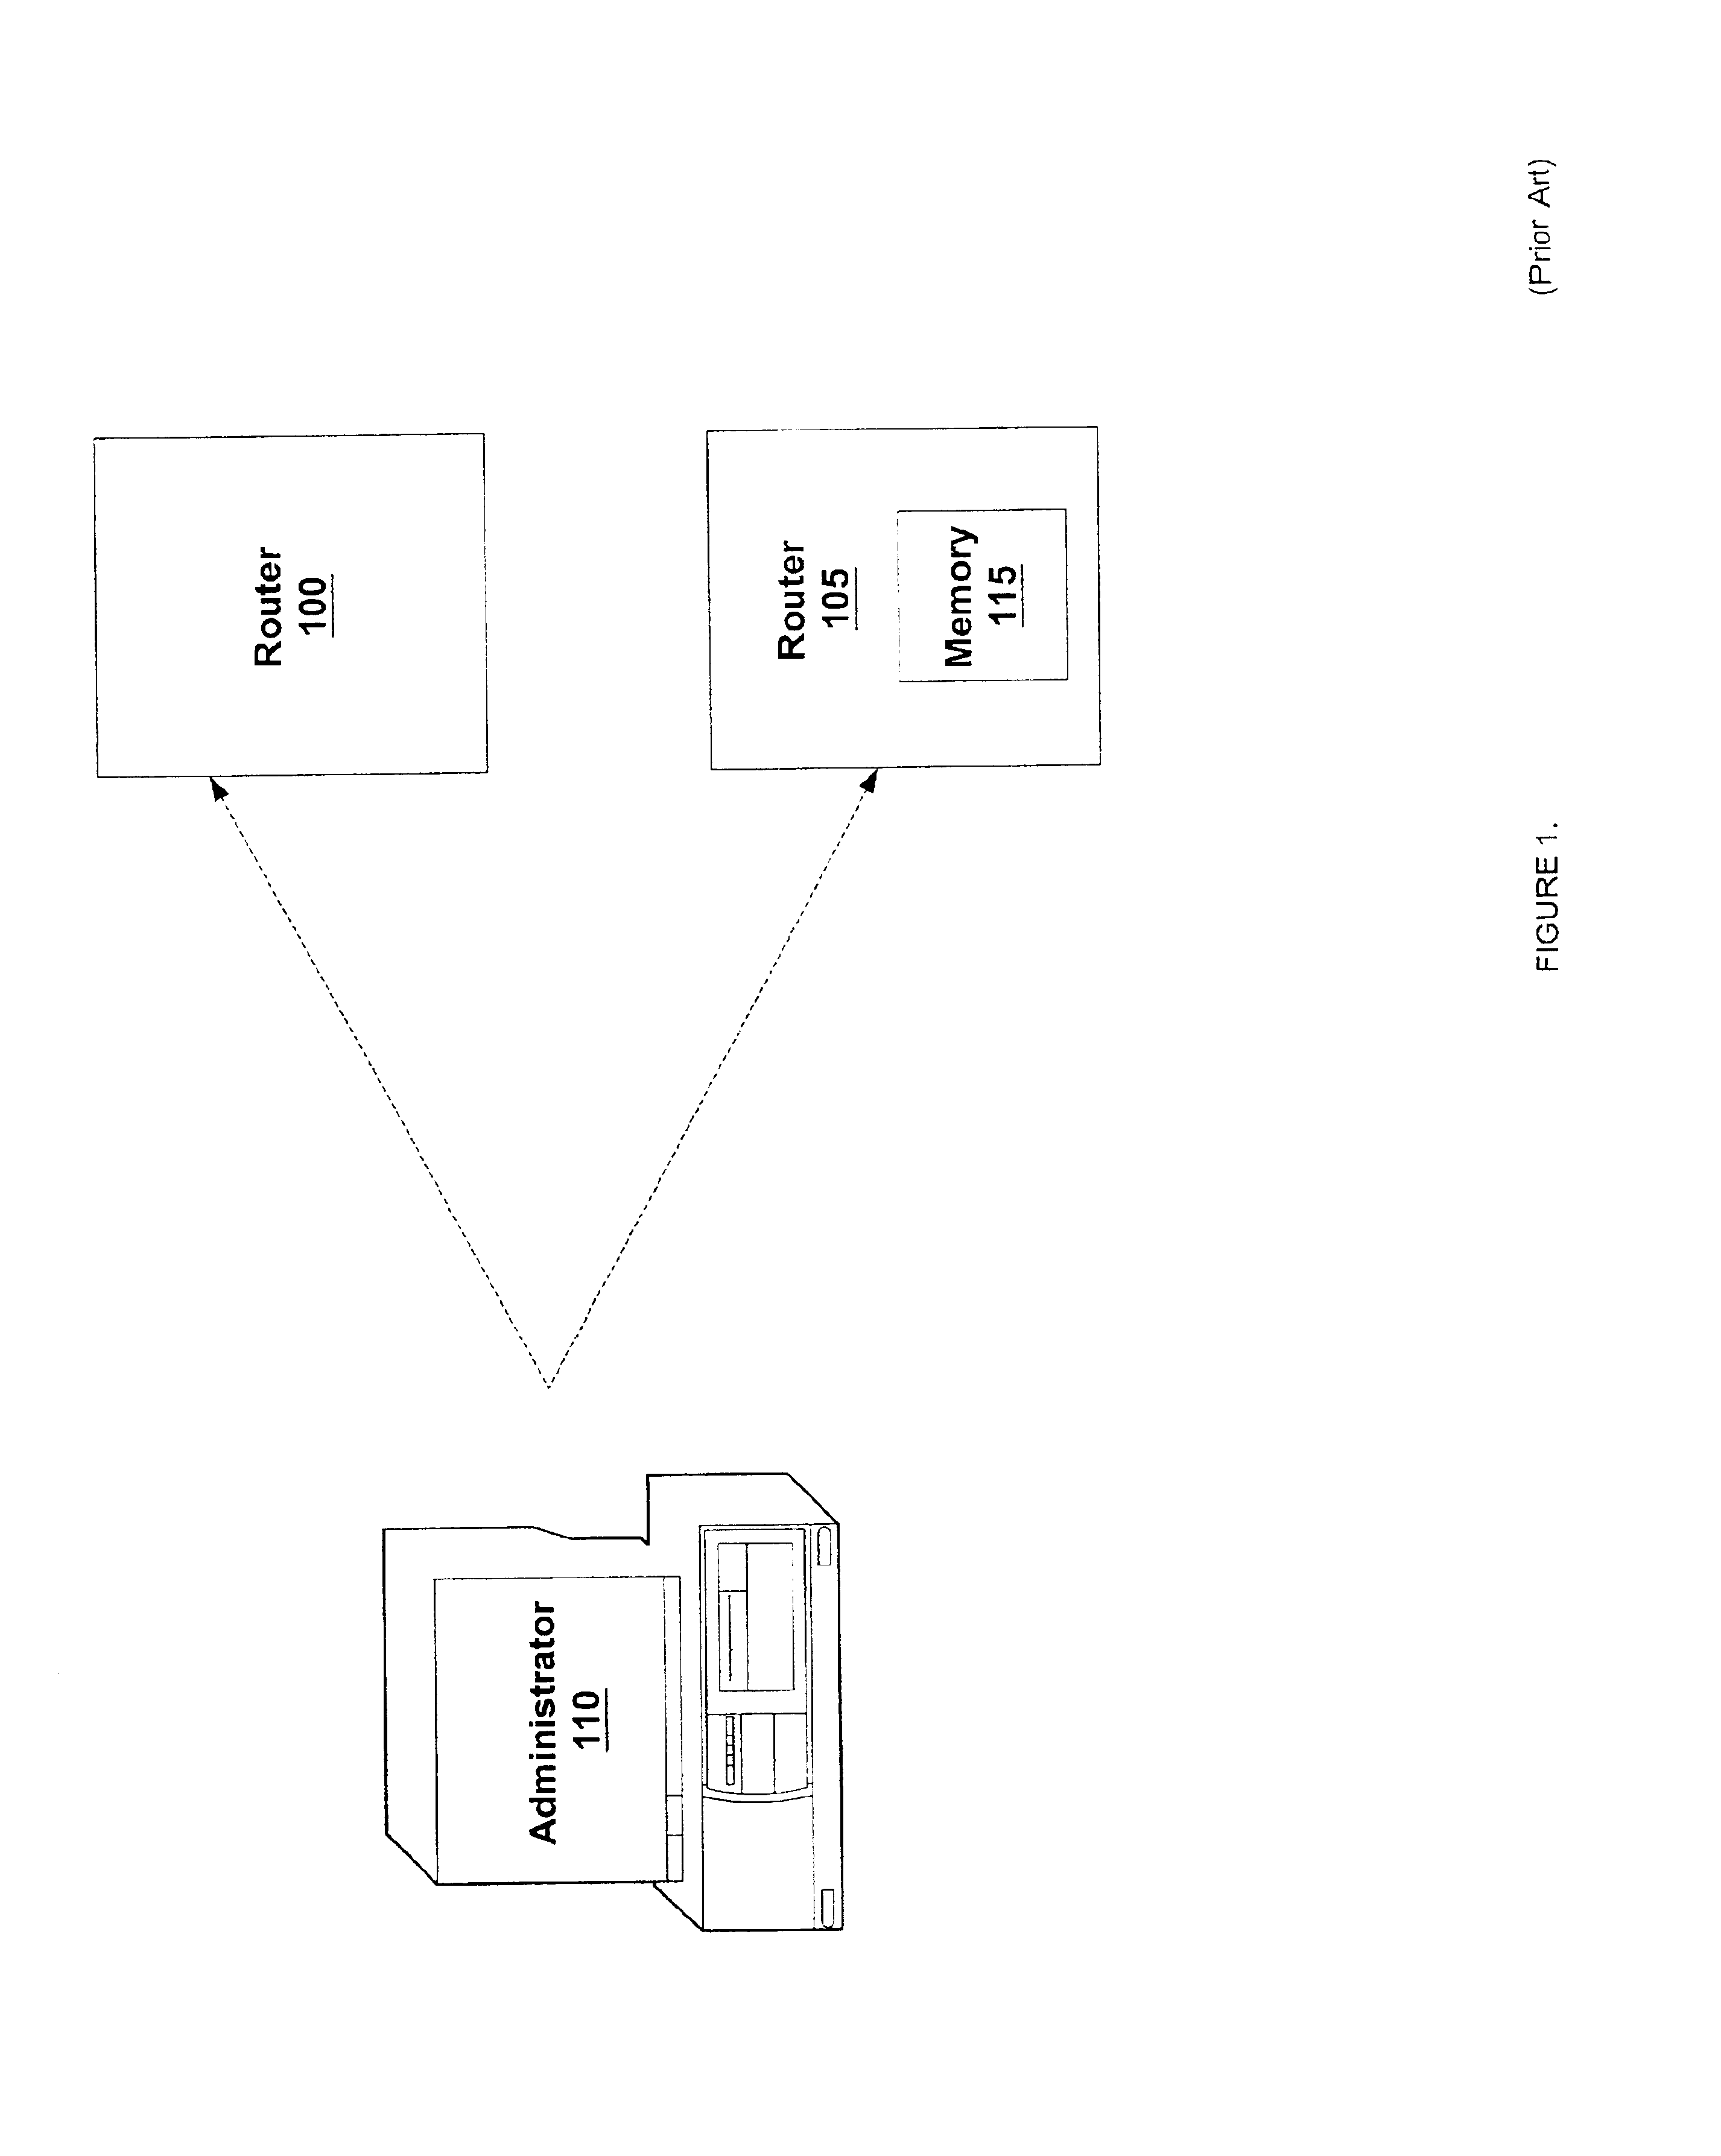 System and method for configuring a network device